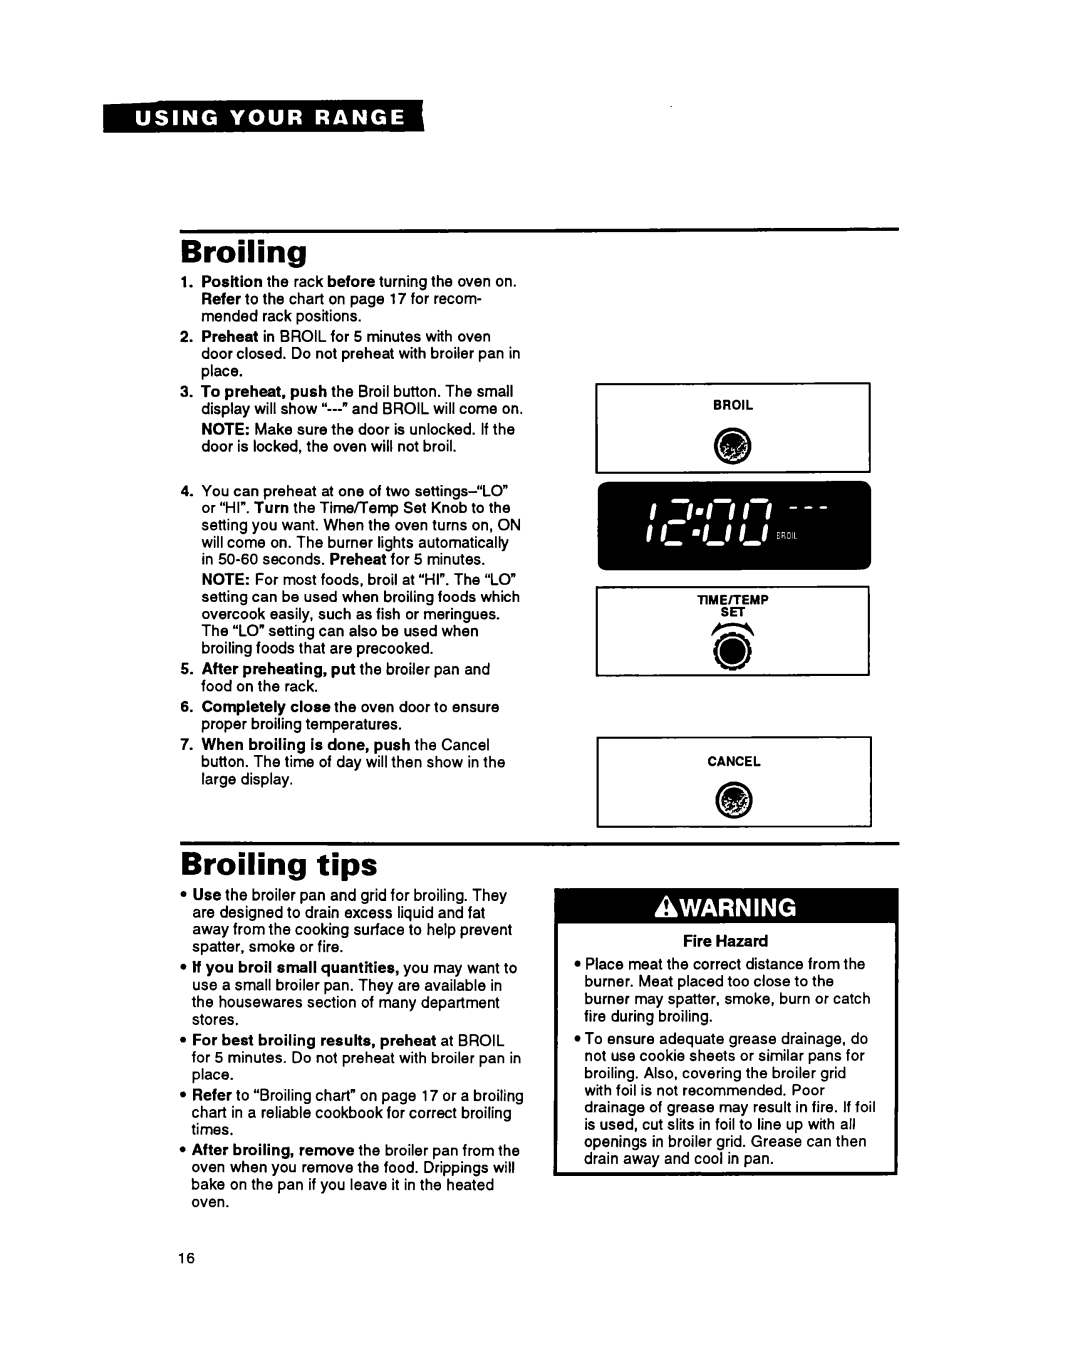 Whirlpool FGS395Y important safety instructions Broiling tips, r-c-l 